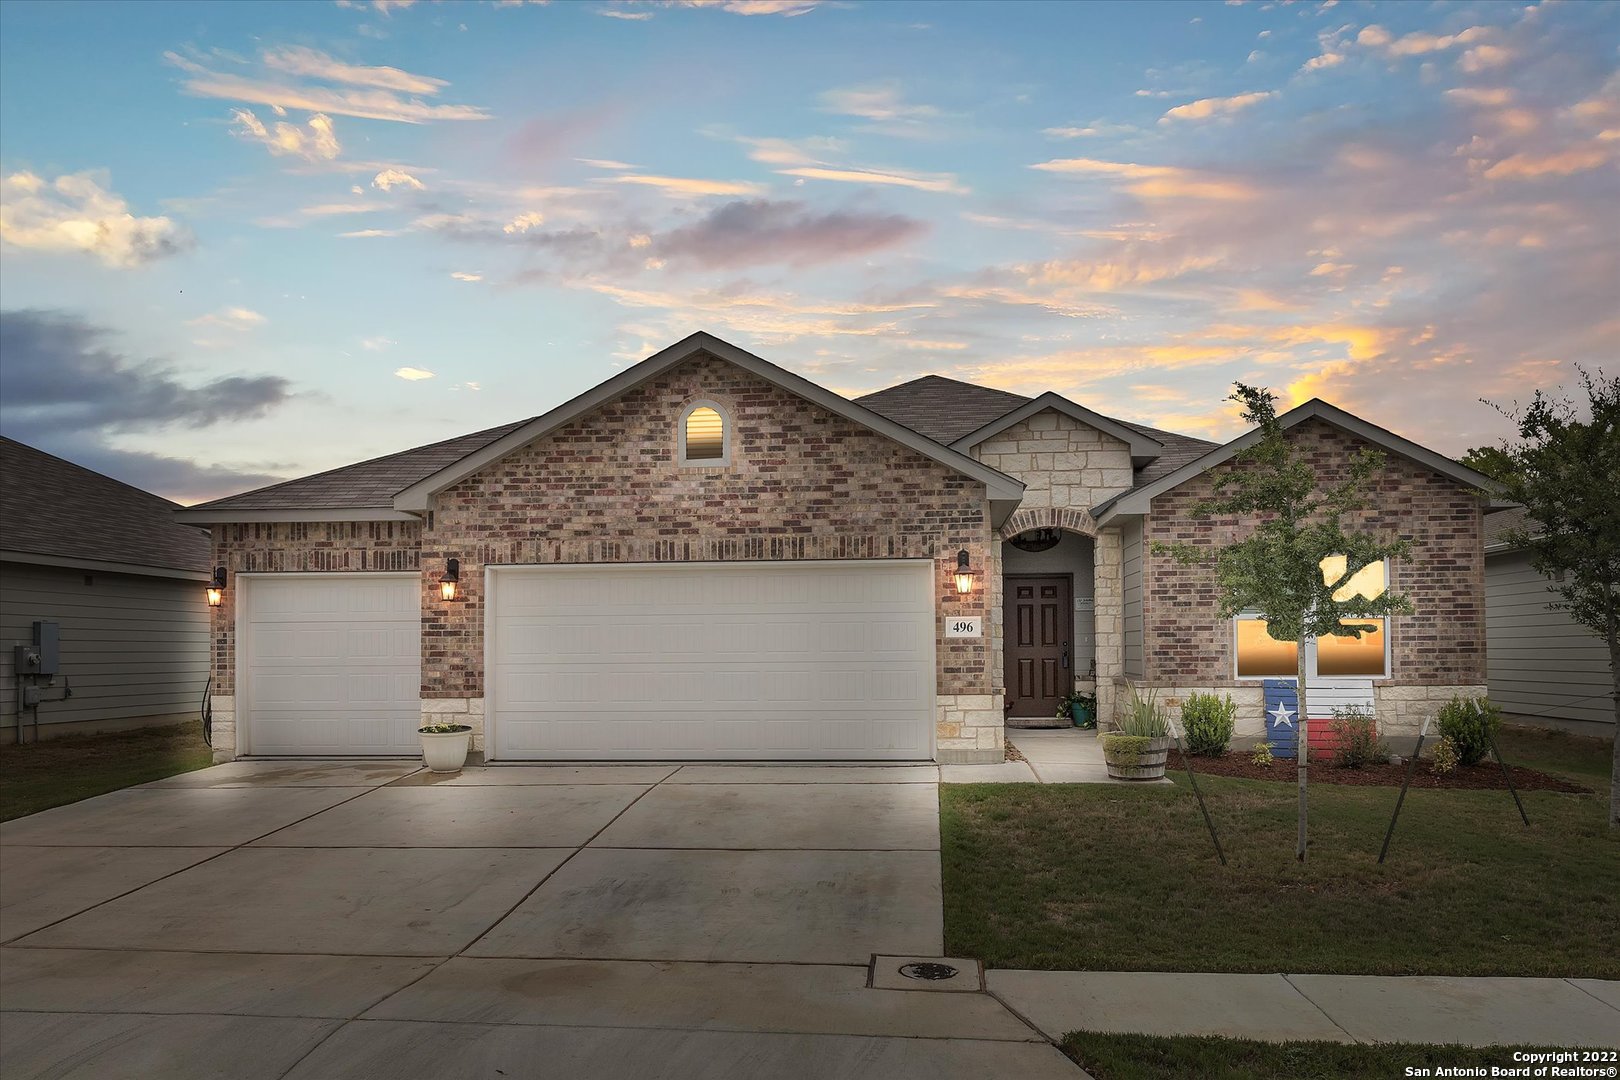 No showings until Saturday, September 10th. Located just minutes from shopping, restaurants, and a variety of parks, this stunning New Braunfels home is ready for its new owner! Pulling up, you'll notice the huge attached garage.Inside, the one-story house features 4 beds, 2 bathrooms, and 1,821 sq. feet. Gorgeous wood floors welcome you in the foyer and throughout the main floor. The spacious living room offers plenty of natural lighting and neutral warm colors that open up the space making it airy and inviting. Hungry? Just steps away is the large, eat-in kitchen, fully equipped with stainless steel appliances, beautiful wood cabinets, and a huge island/breakfast bar. An abundance of space is available for meal prep and storage! The primary suite is like your own private getaway, complete with a walk-in closet and a private bathroom with a walk-in shower and a double vanity.  Outdoor gatherings are best held on the cozy covered patio overlooking the wide, fenced-in property with no neighbors at the back. When warm weather rolls back around, fire up the grill with a bar or soak your troubles away in the outdoor steel tub while furry friends run around! Around the corner, you'll also find garden plots perfect for nurturing your own herbs and vegetables! Want to see 496 Long Leaf Dr in person? Don't wait! Schedule a private showing with your favorite agent today!